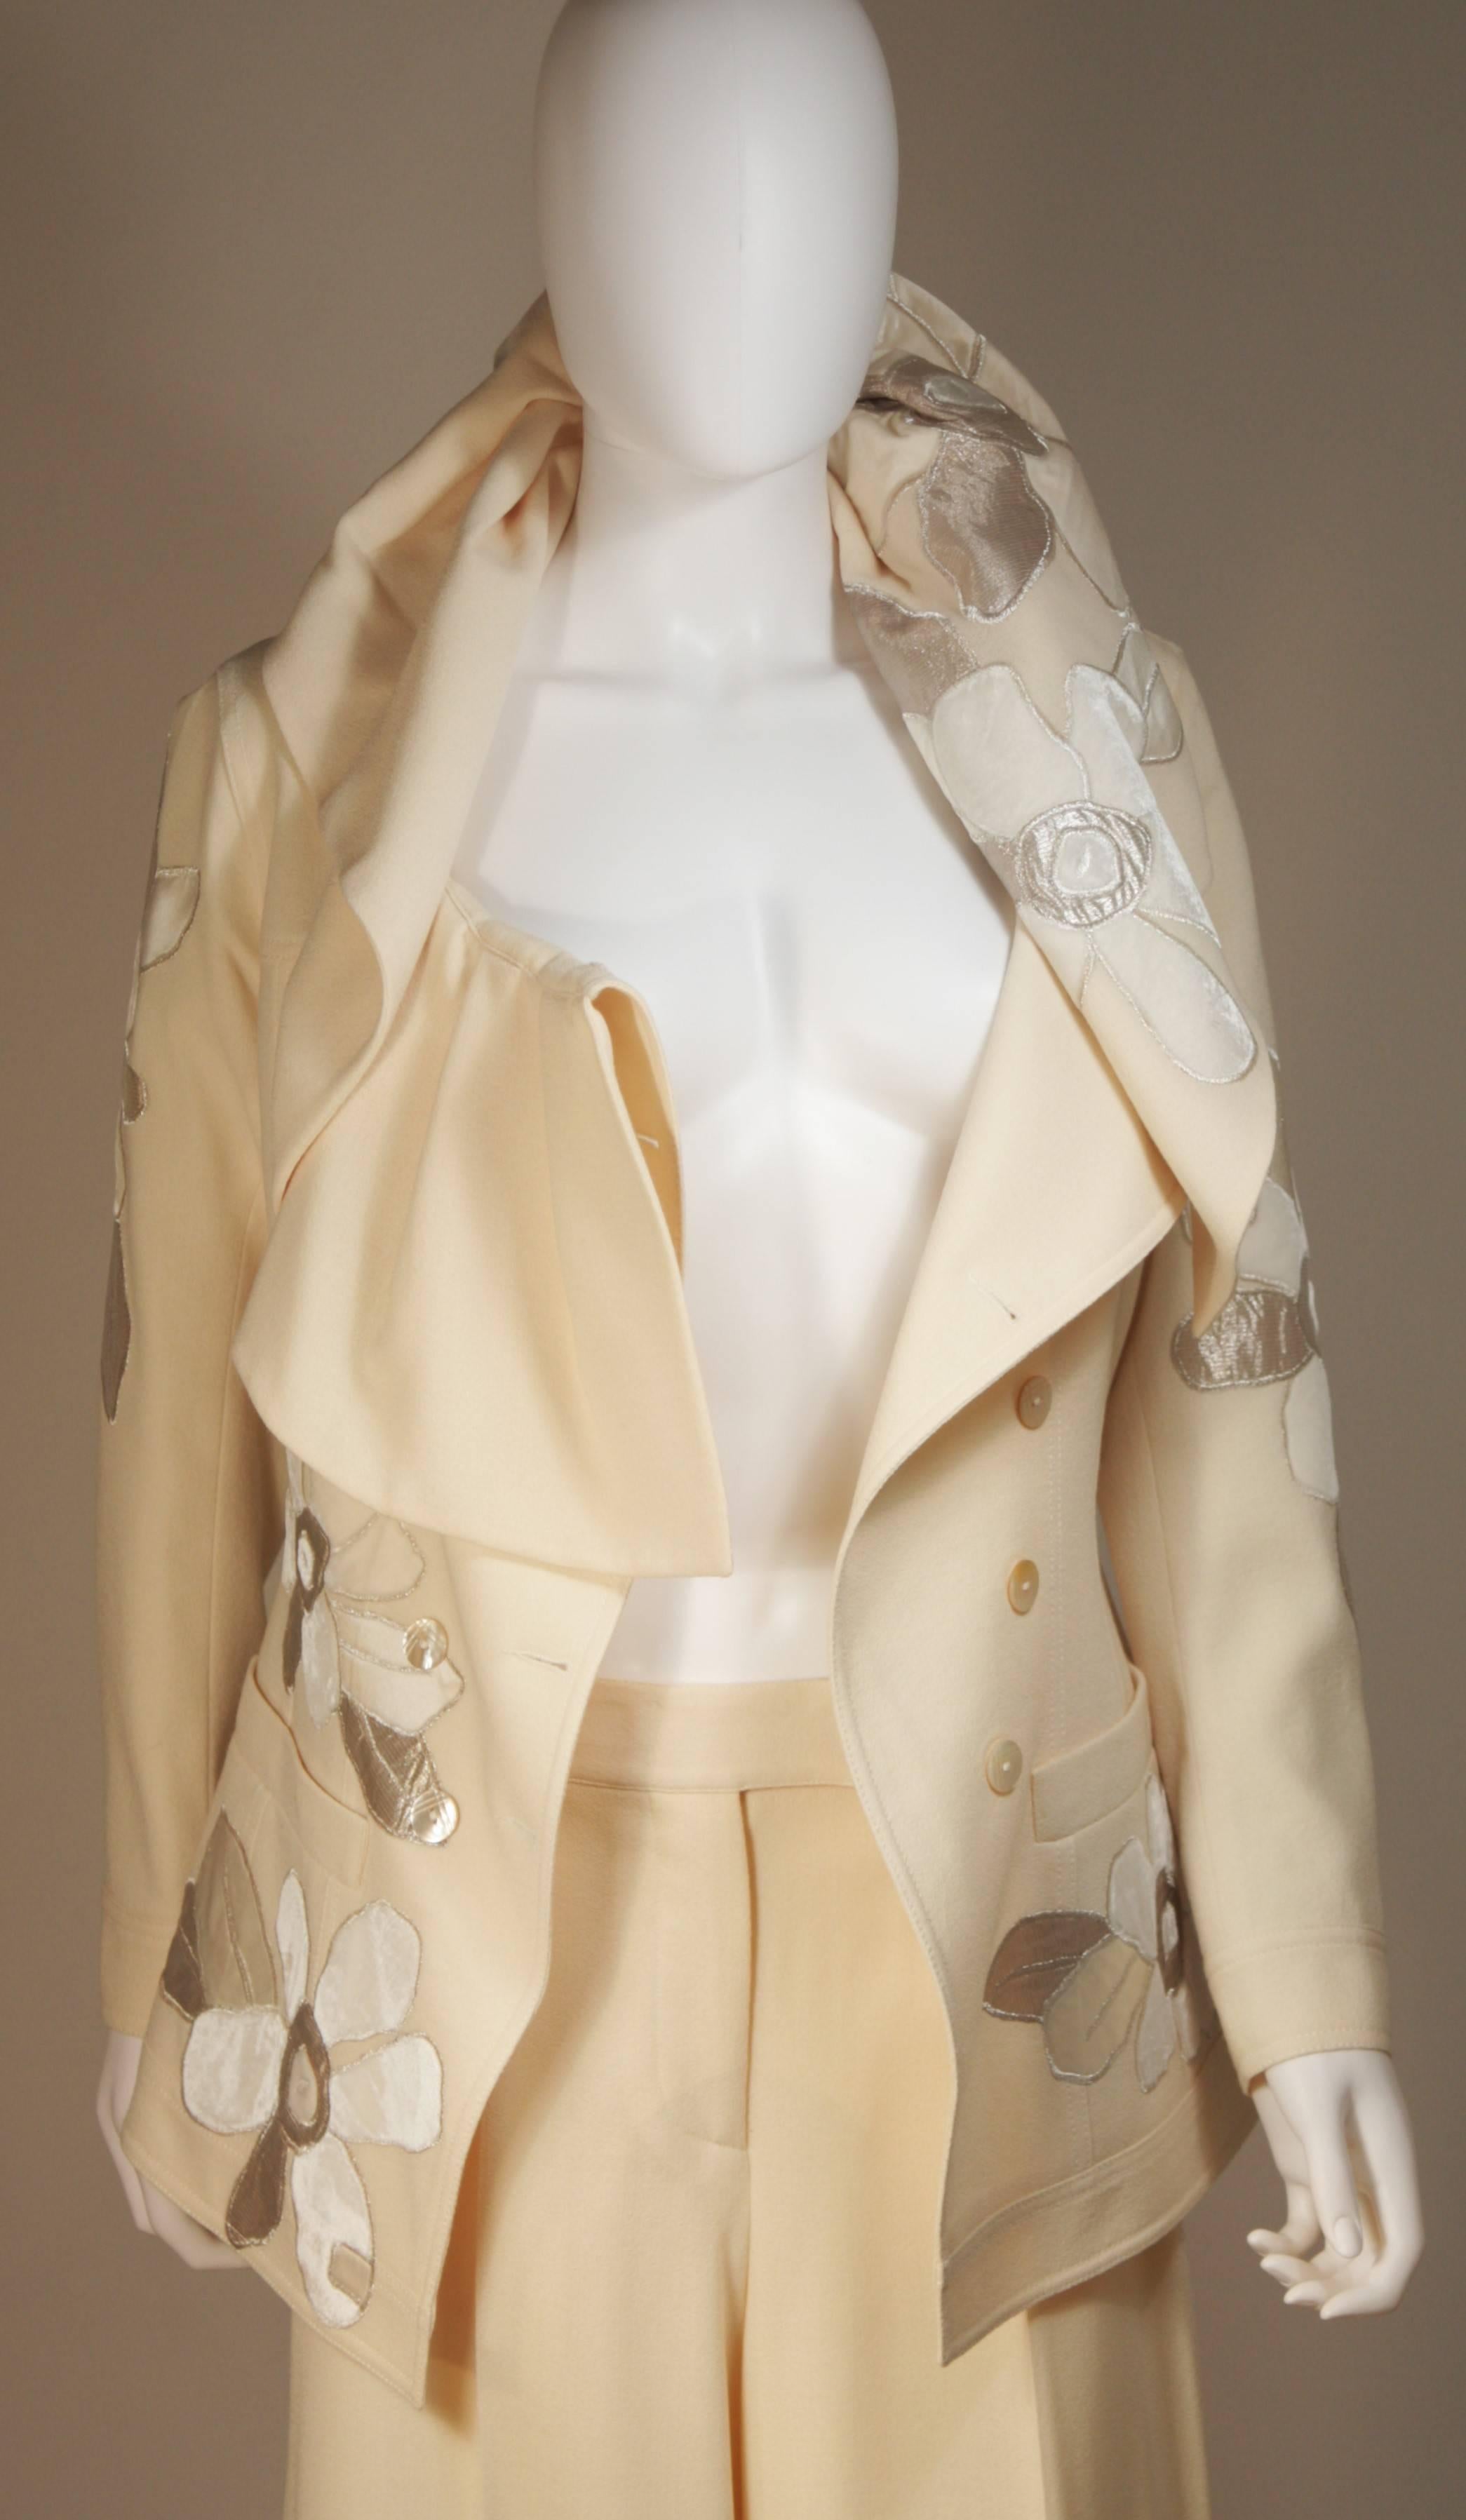 This John Galliano suit is composed of an off white fabric with silver metallic applique. The suit features a dramatic ruffled neckline which can be styled in a variety of ways. The pants are a classic wide leg style with center front crease and